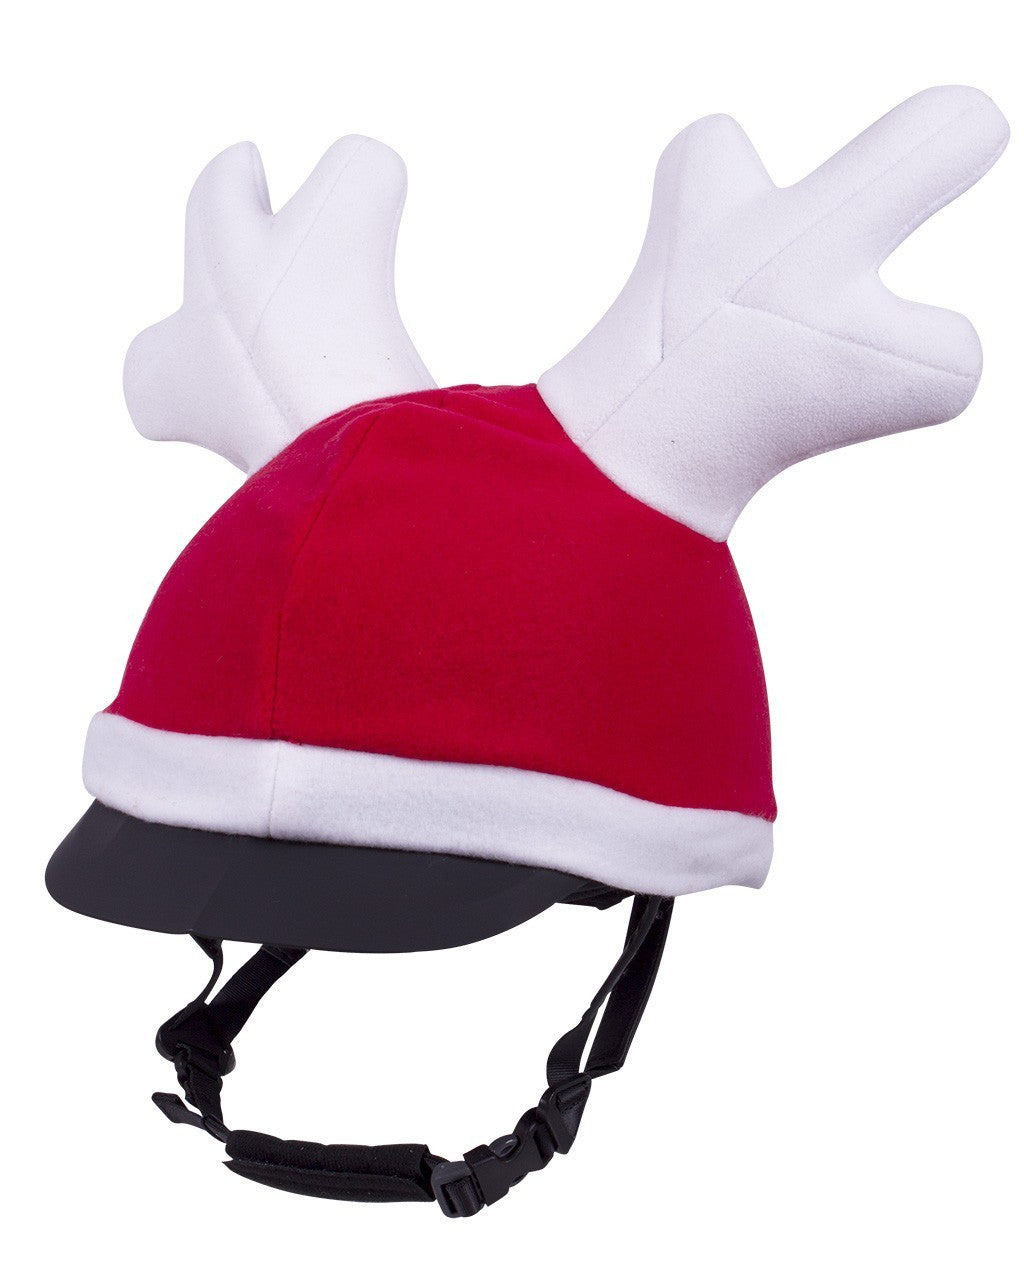 Reindeer riding hat cover